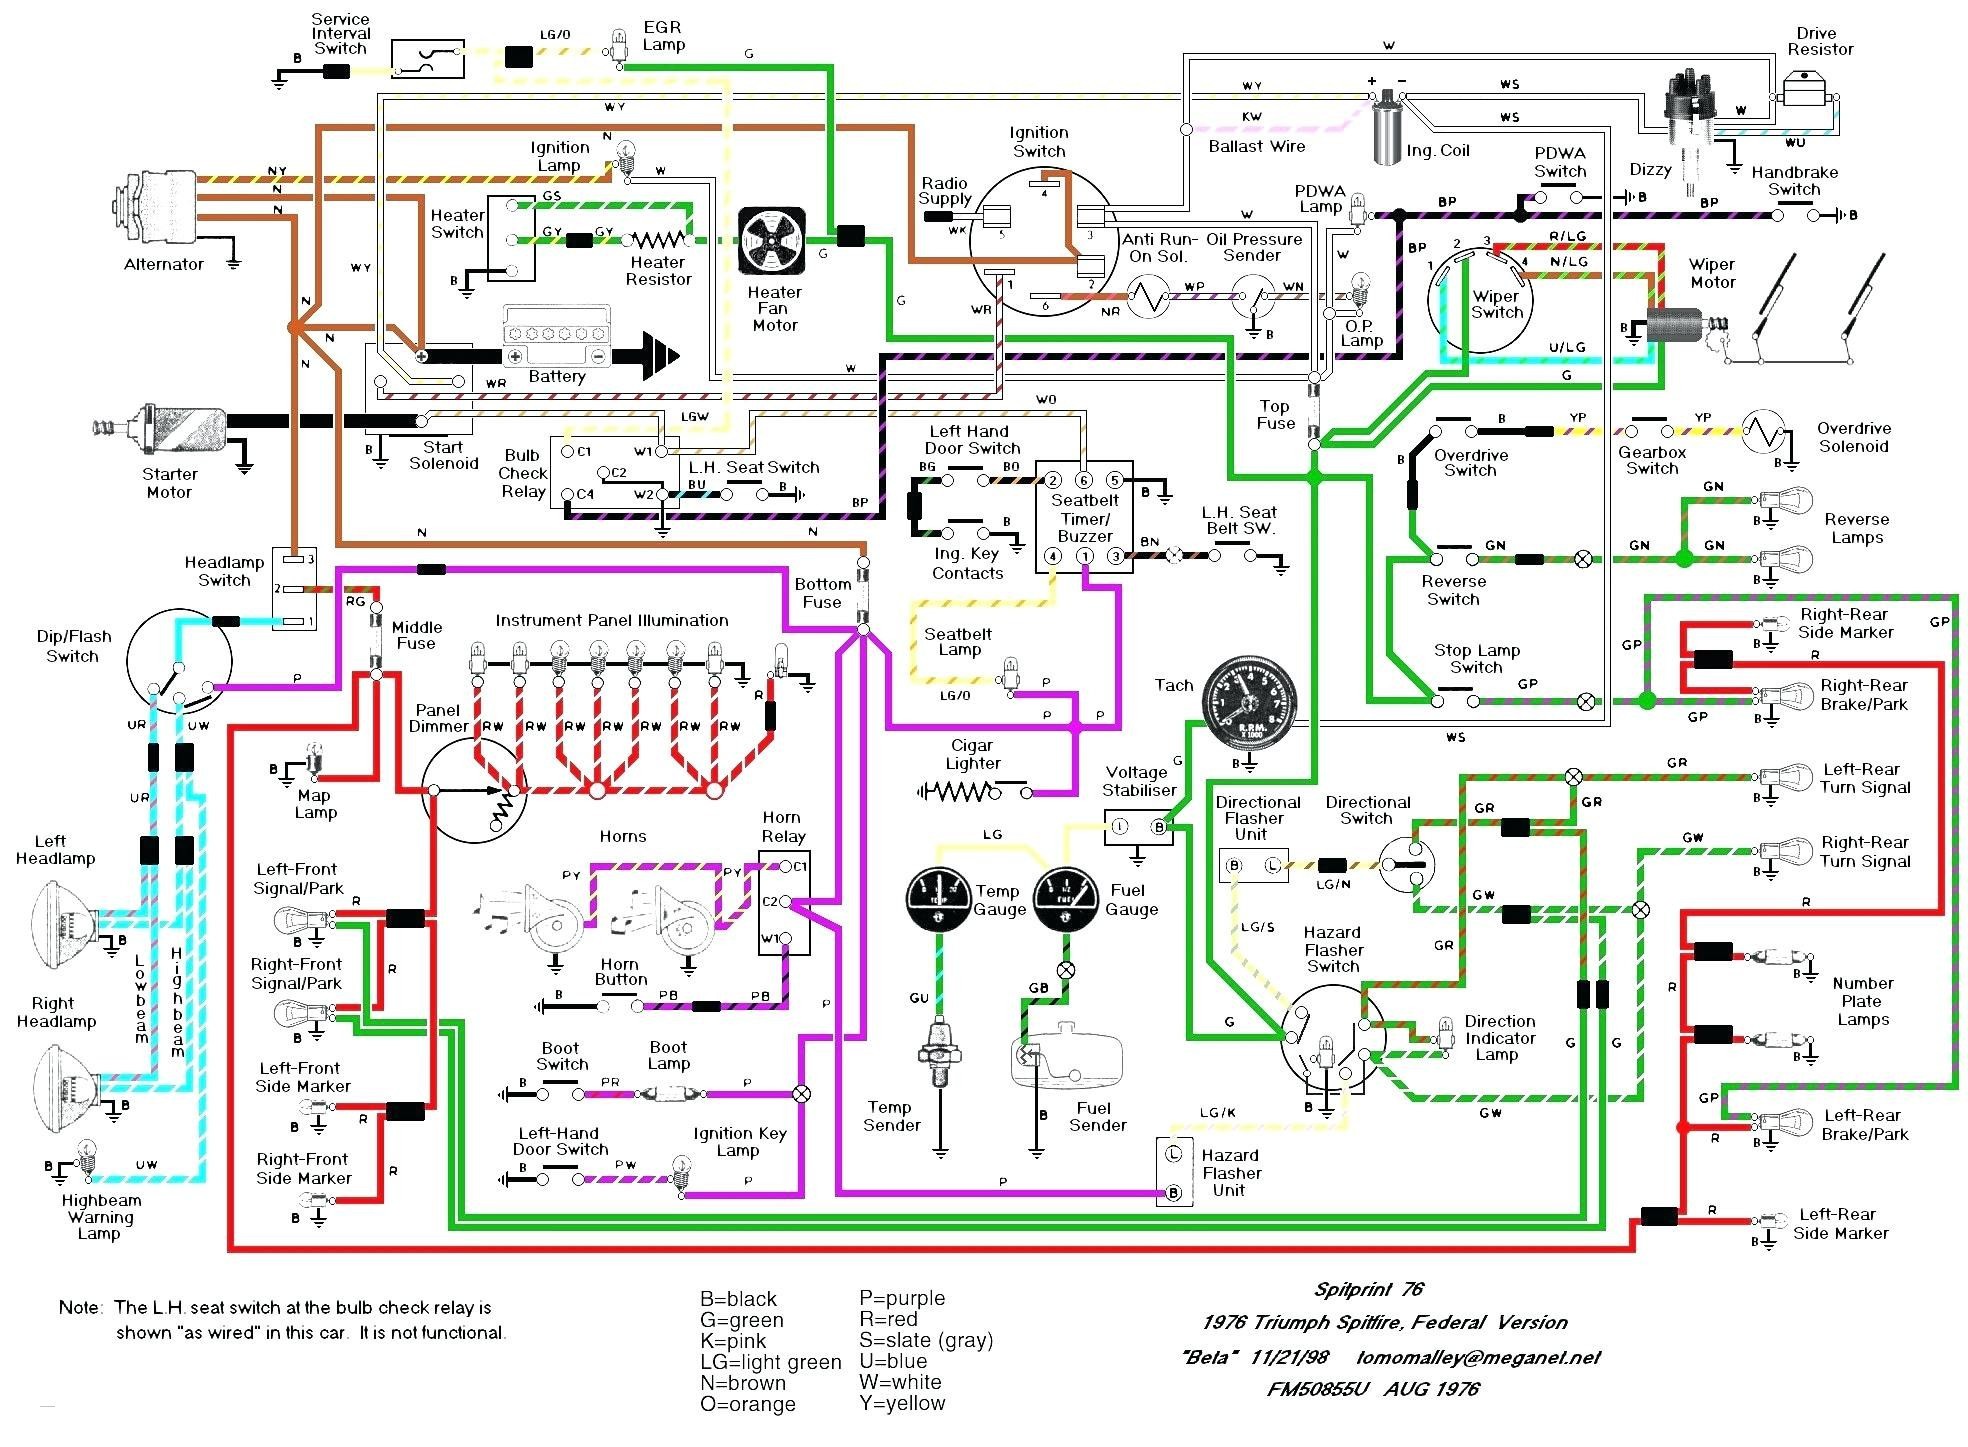 Automotive Wiring Diagram Pdf Reference Home Electrical Wiring Diagram Newest Automotive Air Conditioning